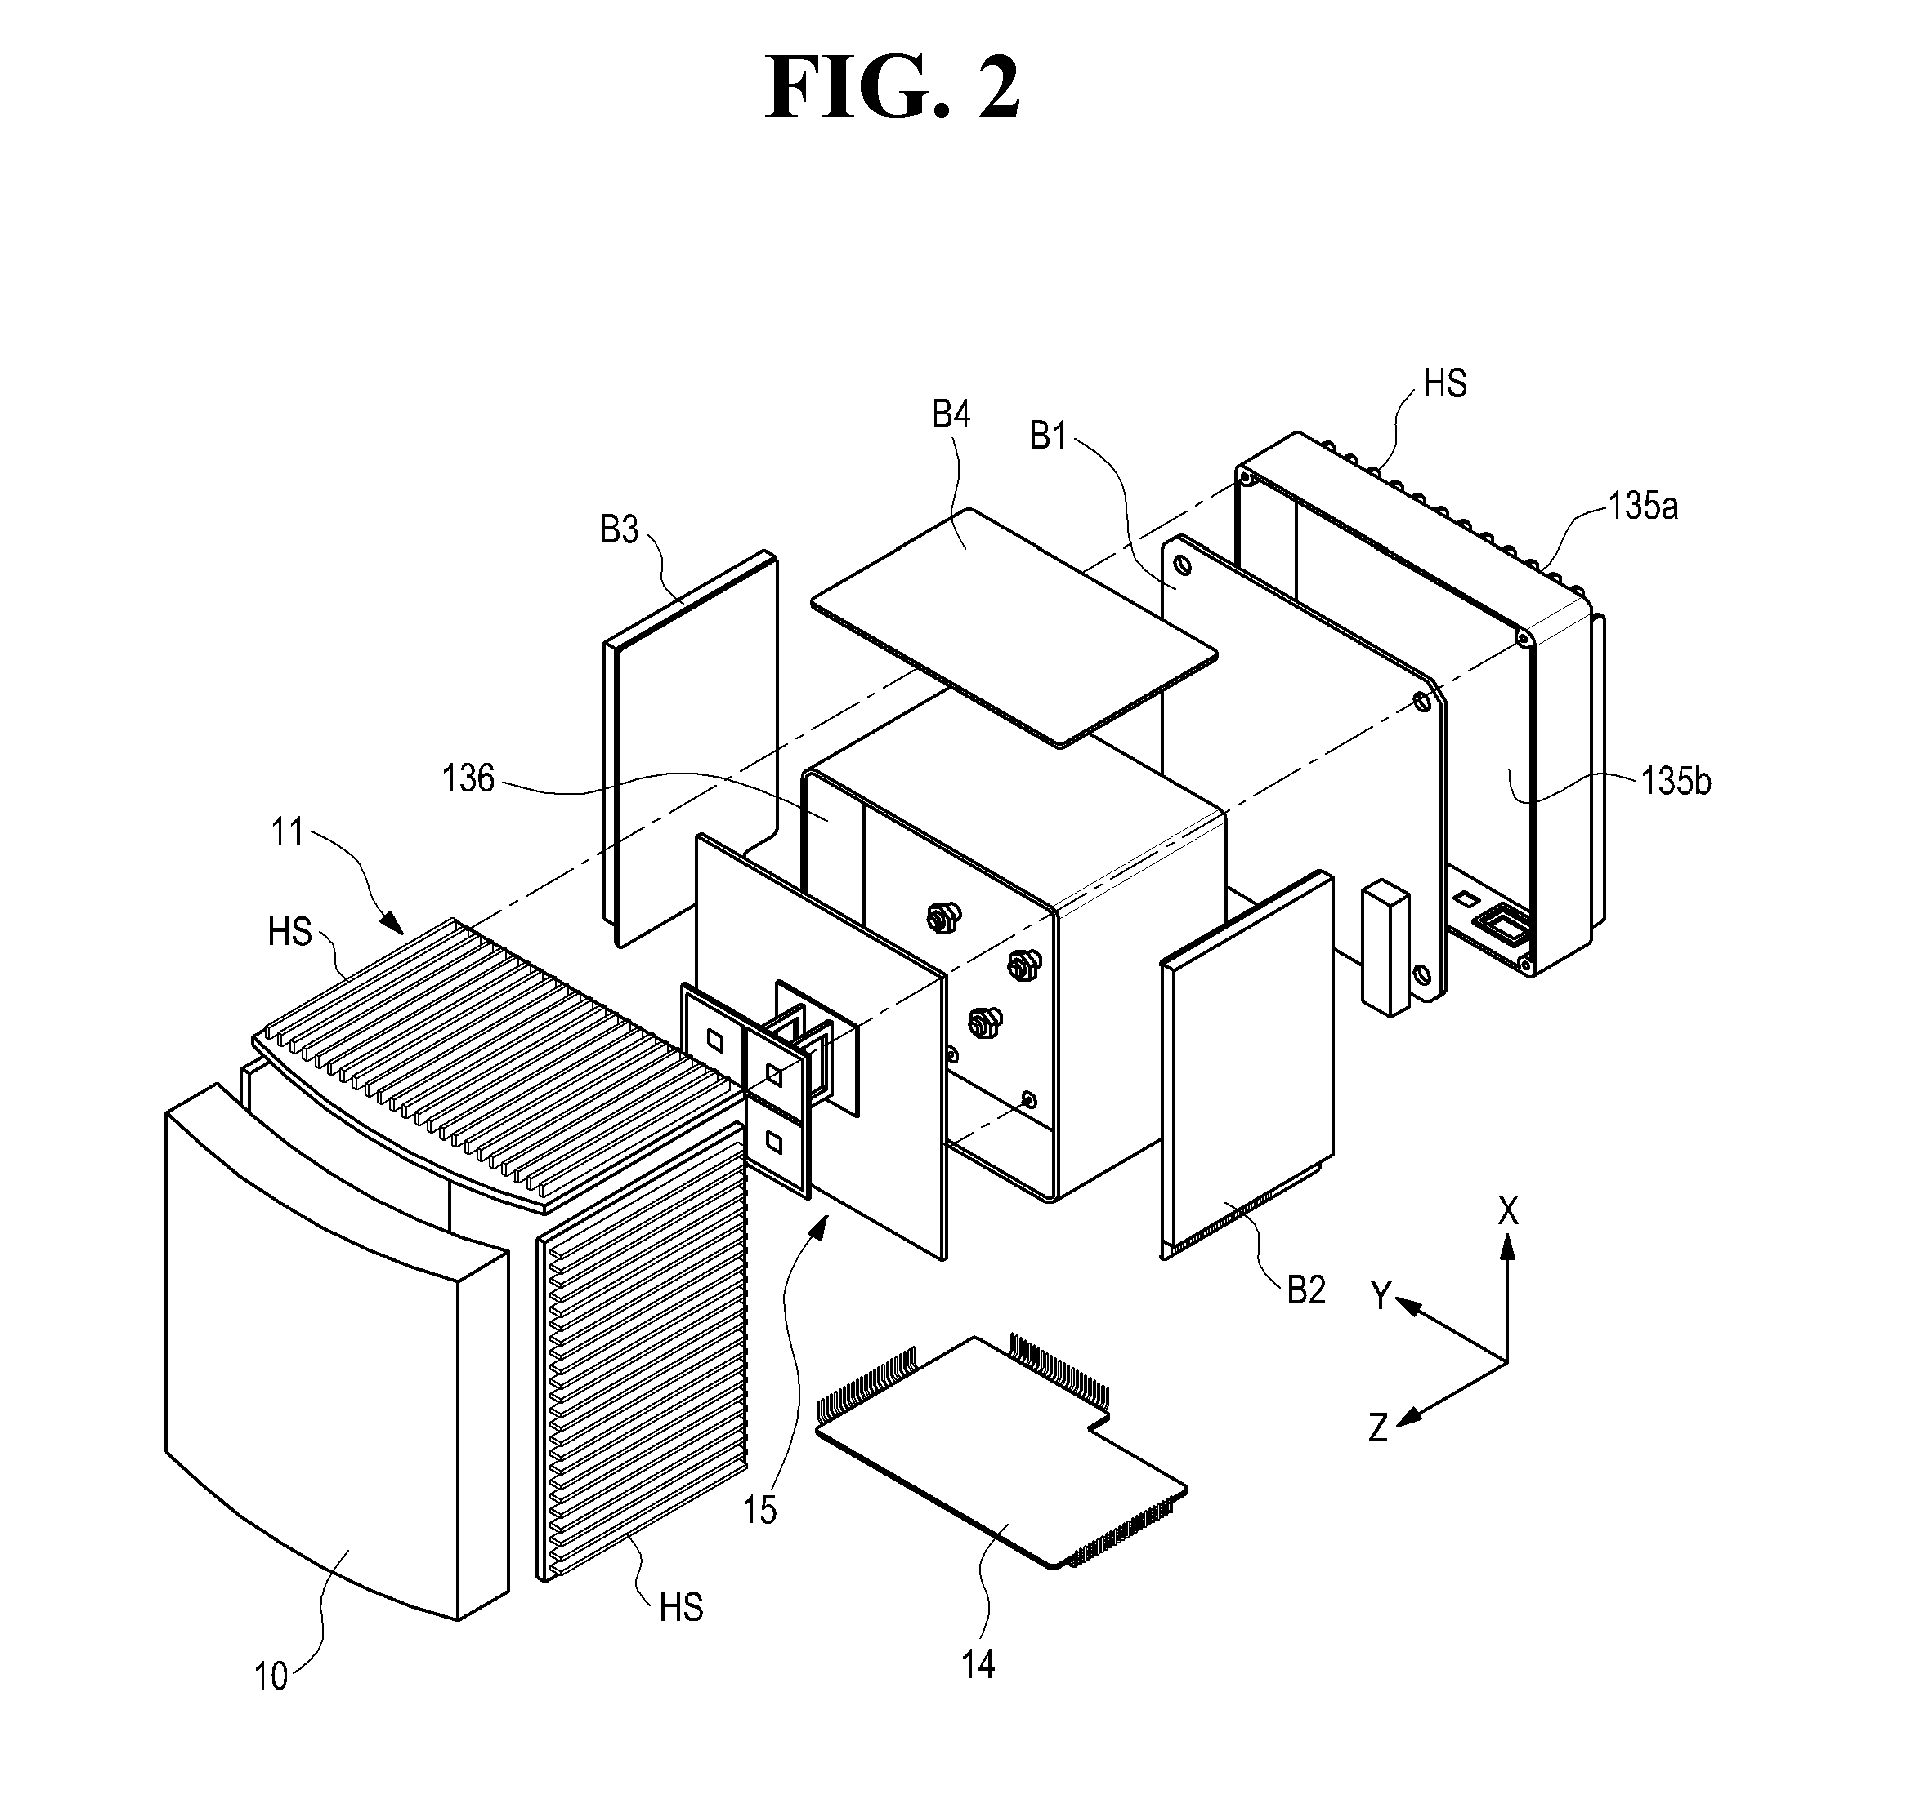 Small-sized base station device in mobile communication system